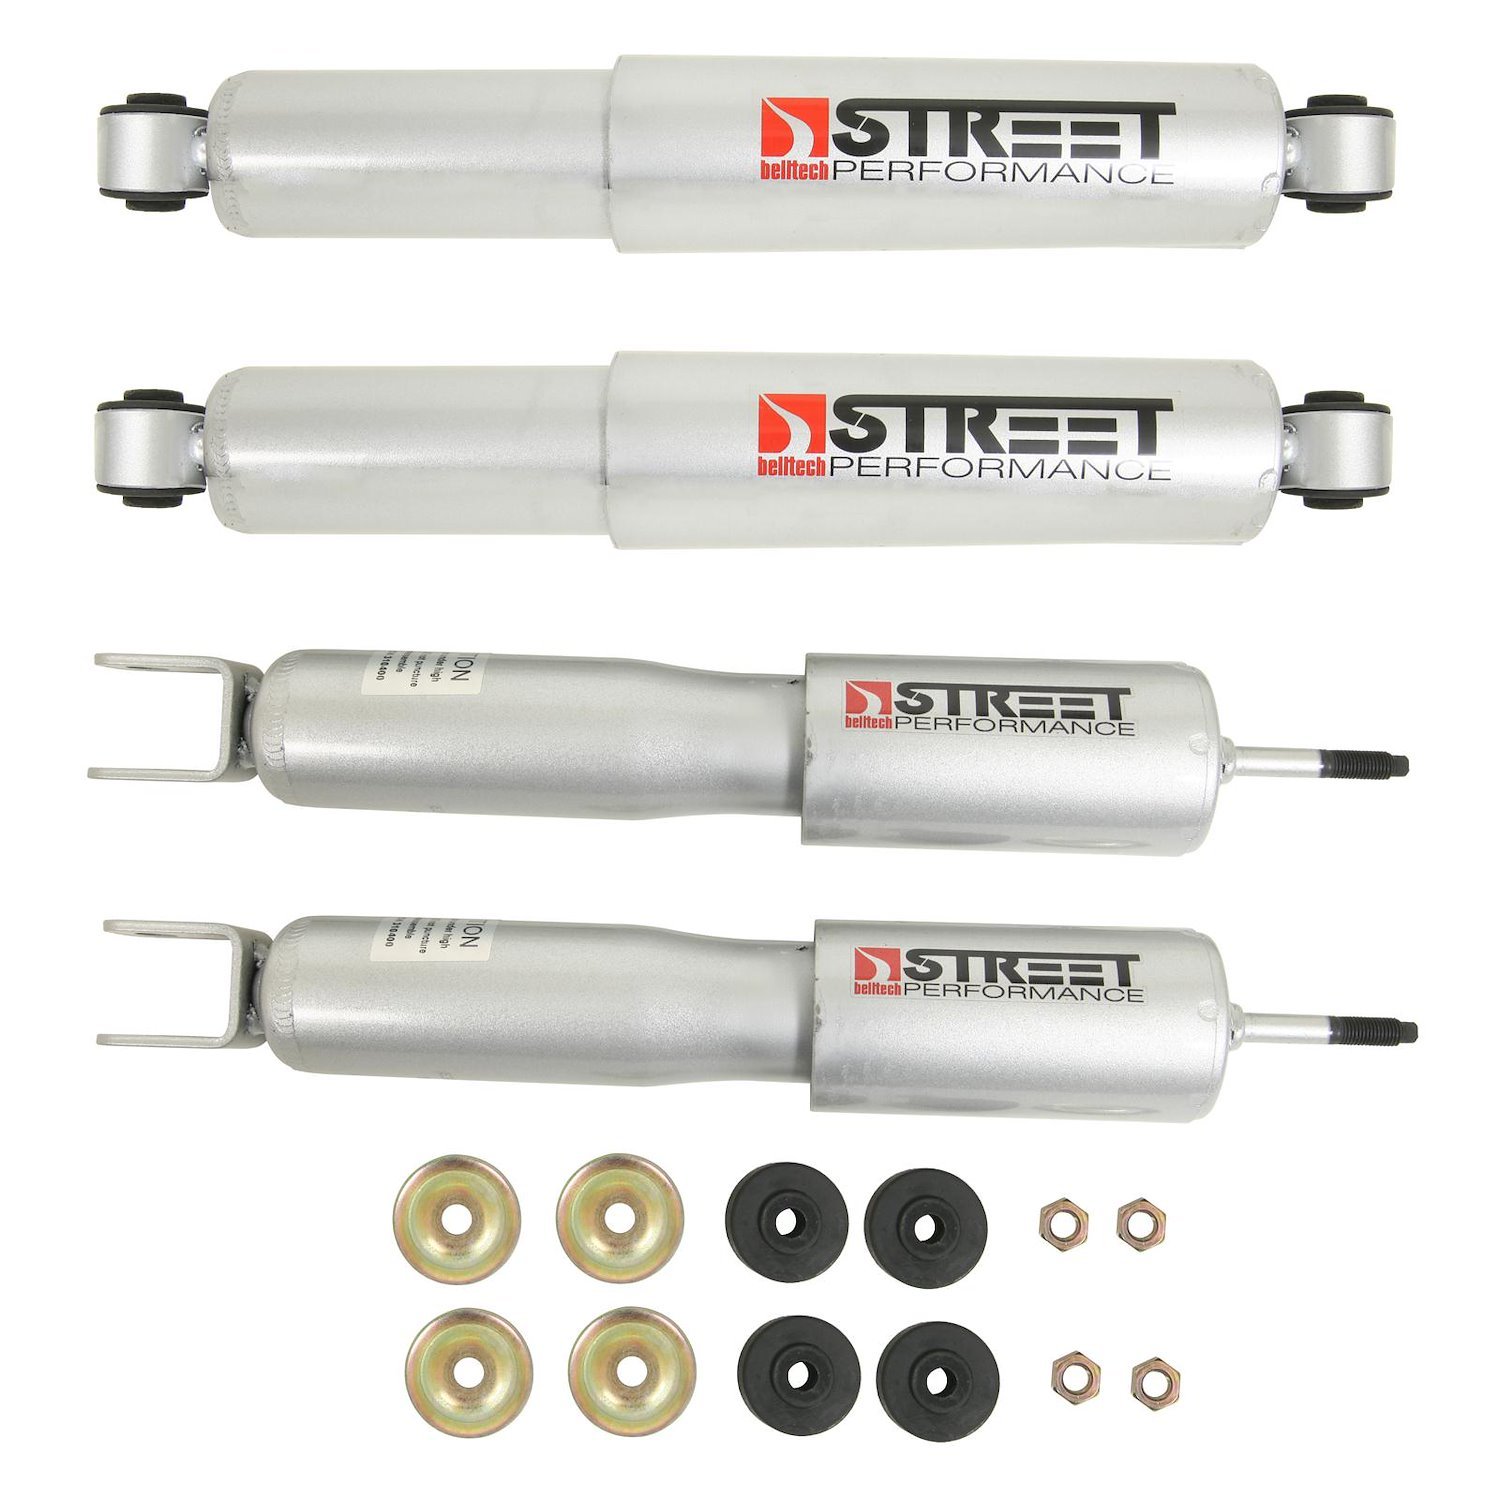 Street Performance Shock Set includes (2) 146-10103I Front Shocks and (2) 146-2216IF Rear Shocks